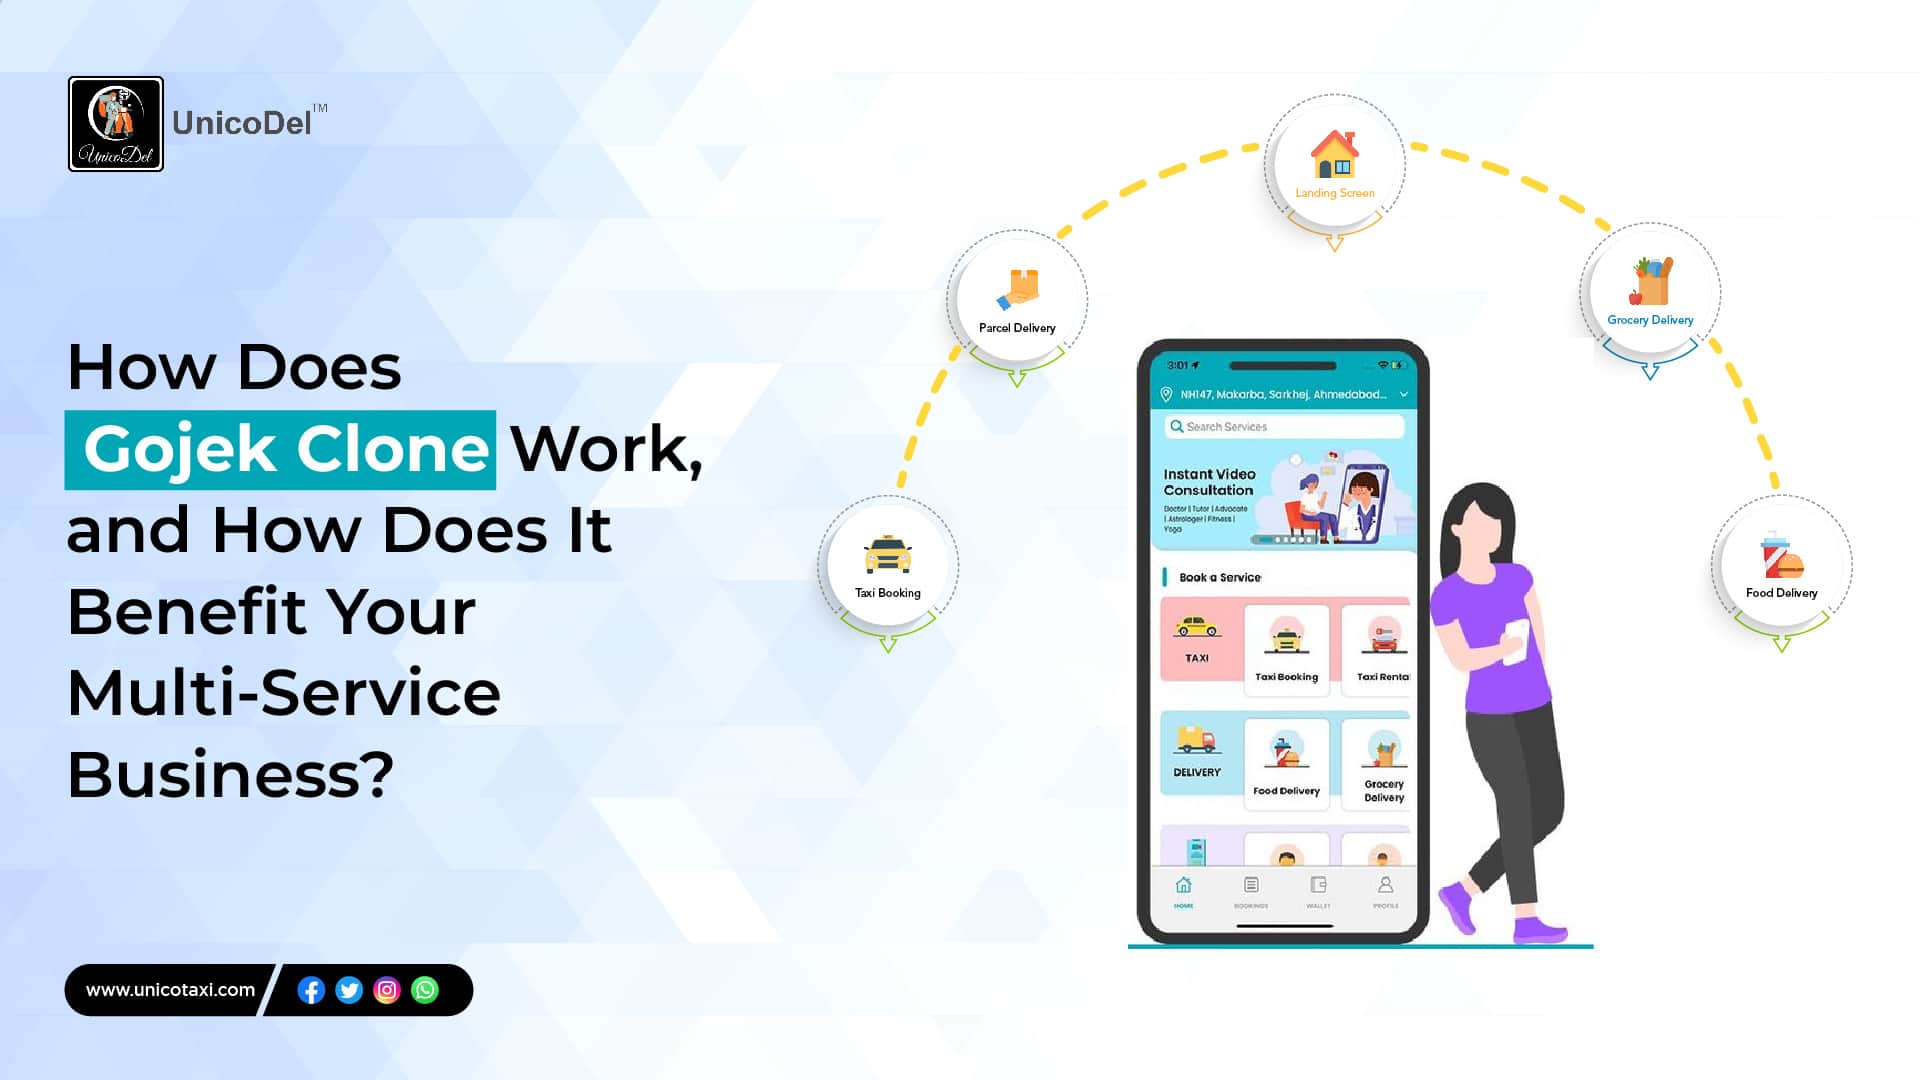 How Does Gojek Clone Work, and How Can It Benefit Your Business?